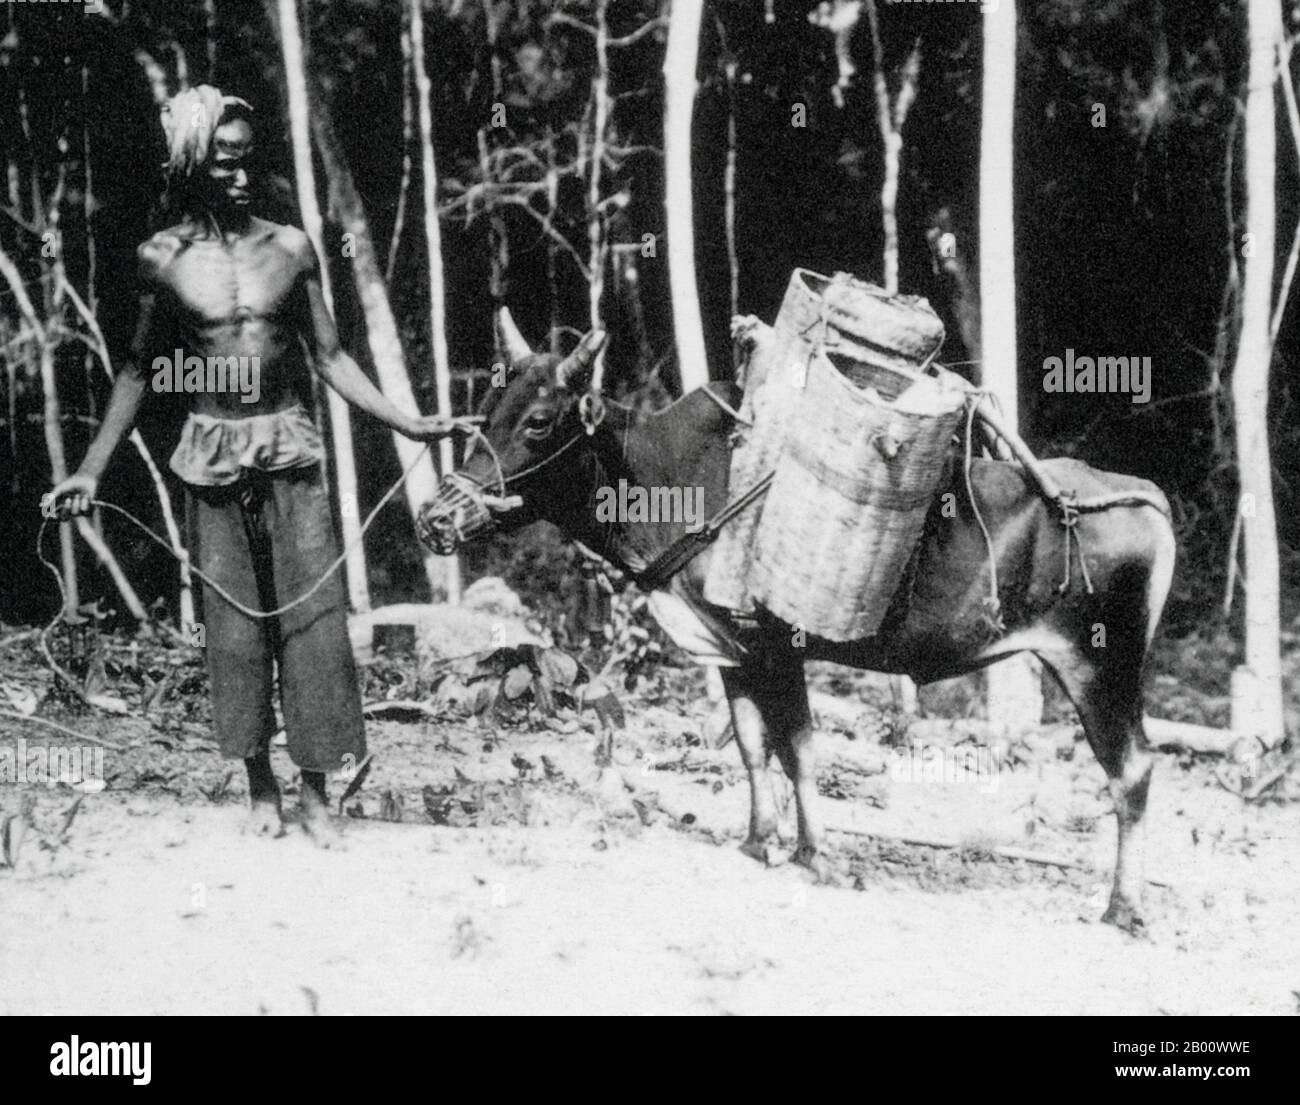 Thailand: A farmer with his pack ox in Chiang Saen, northern Siam, 1902.  Pack oxen were the prime mode of transport at the time and facilitated trade around Laos, southern China, Vietnam, Cambodia, Thailand and Burma. Each of the baskets on the packsaddles could carry 20 kg of paddy. Stock Photo